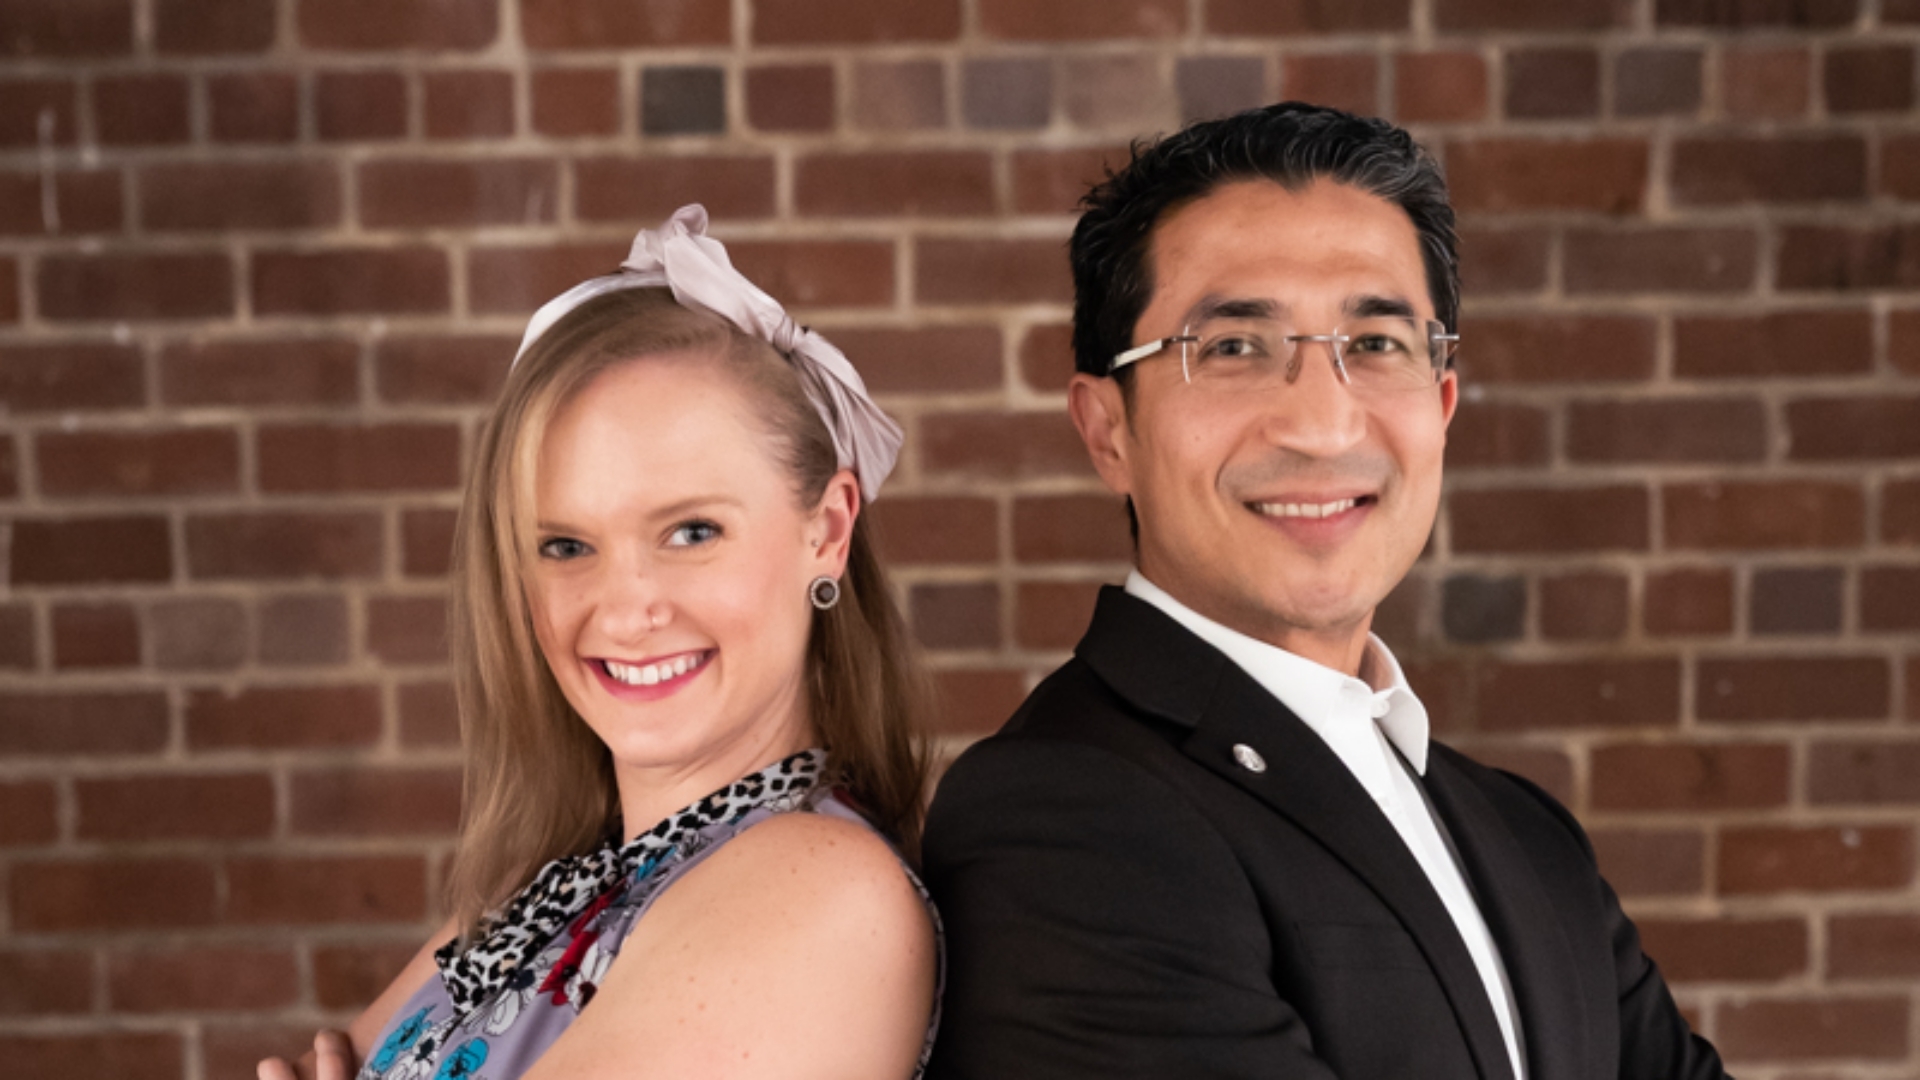 Atrium Health's Rasu Shreatha competes with Charlotte Ballet's Sarah Hayes Harkins in Dancing with the Stars of Charlotte 2020